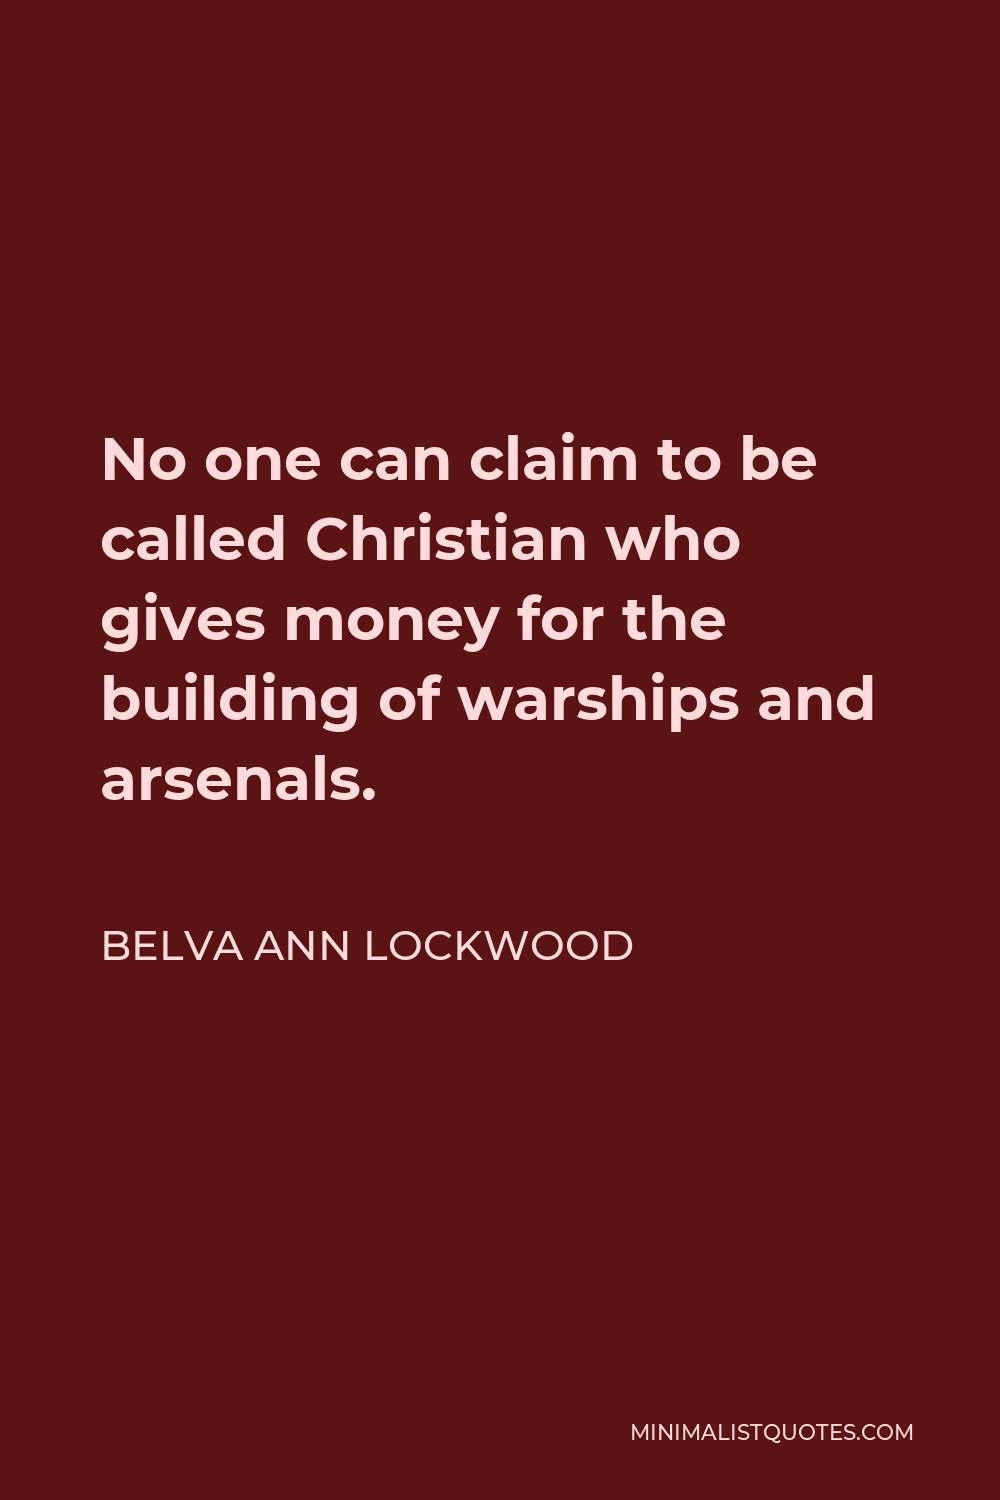 Belva Ann Lockwood Quote - No one can claim to be called Christian who gives money for the building of warships and arsenals.